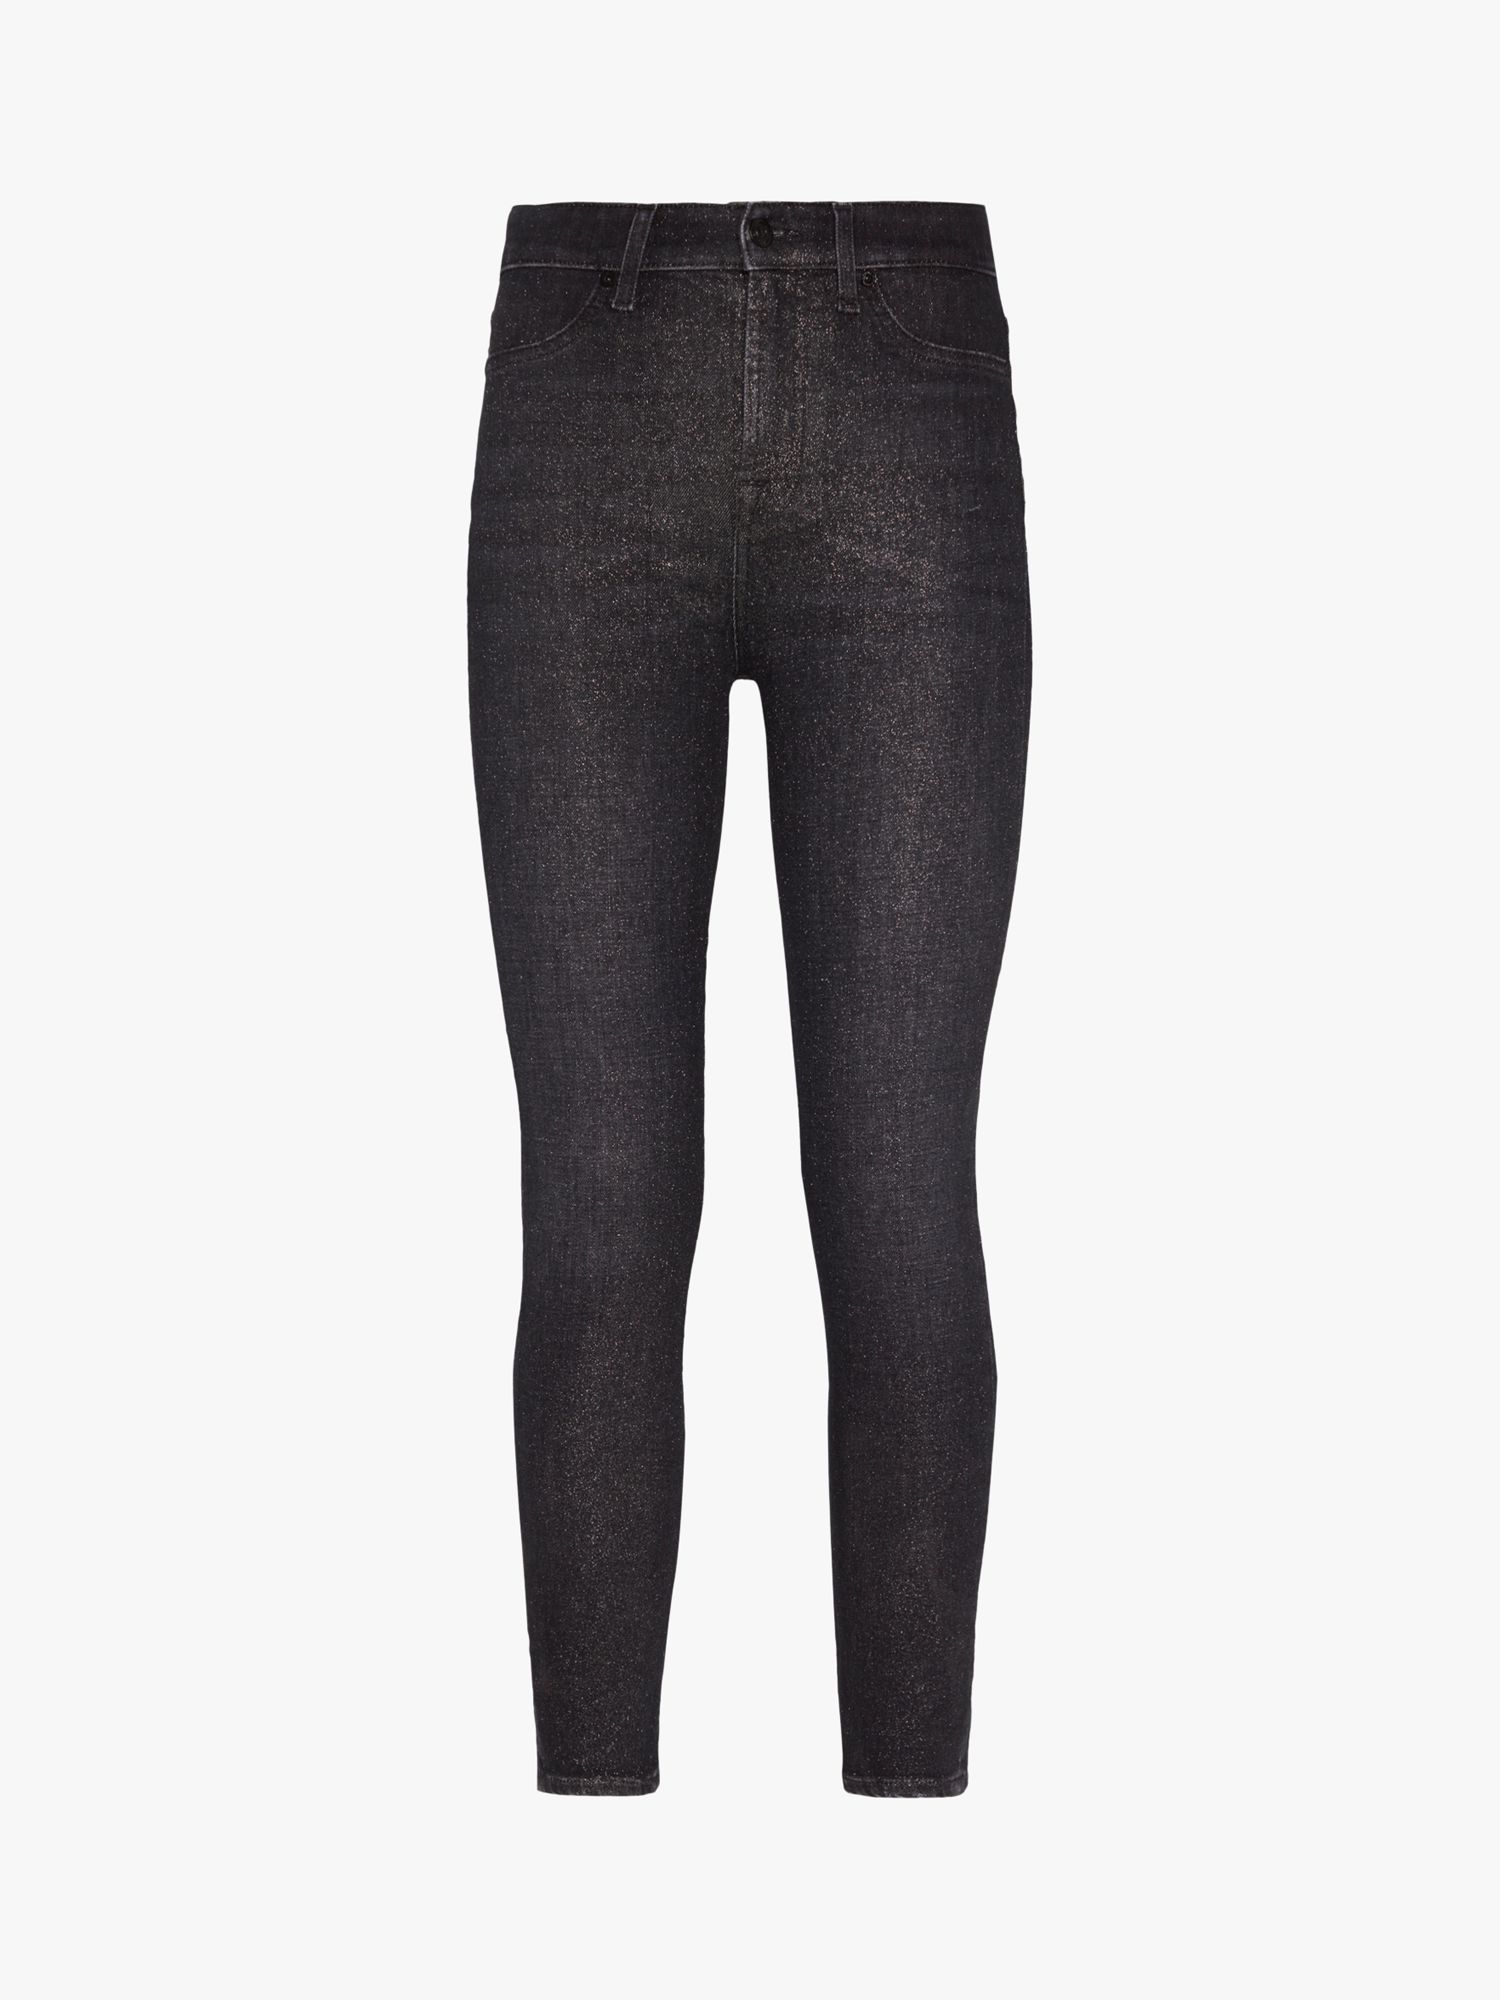 7 For All Mankind Aubrey Coated Glitter Jeans, Black at John Lewis ...